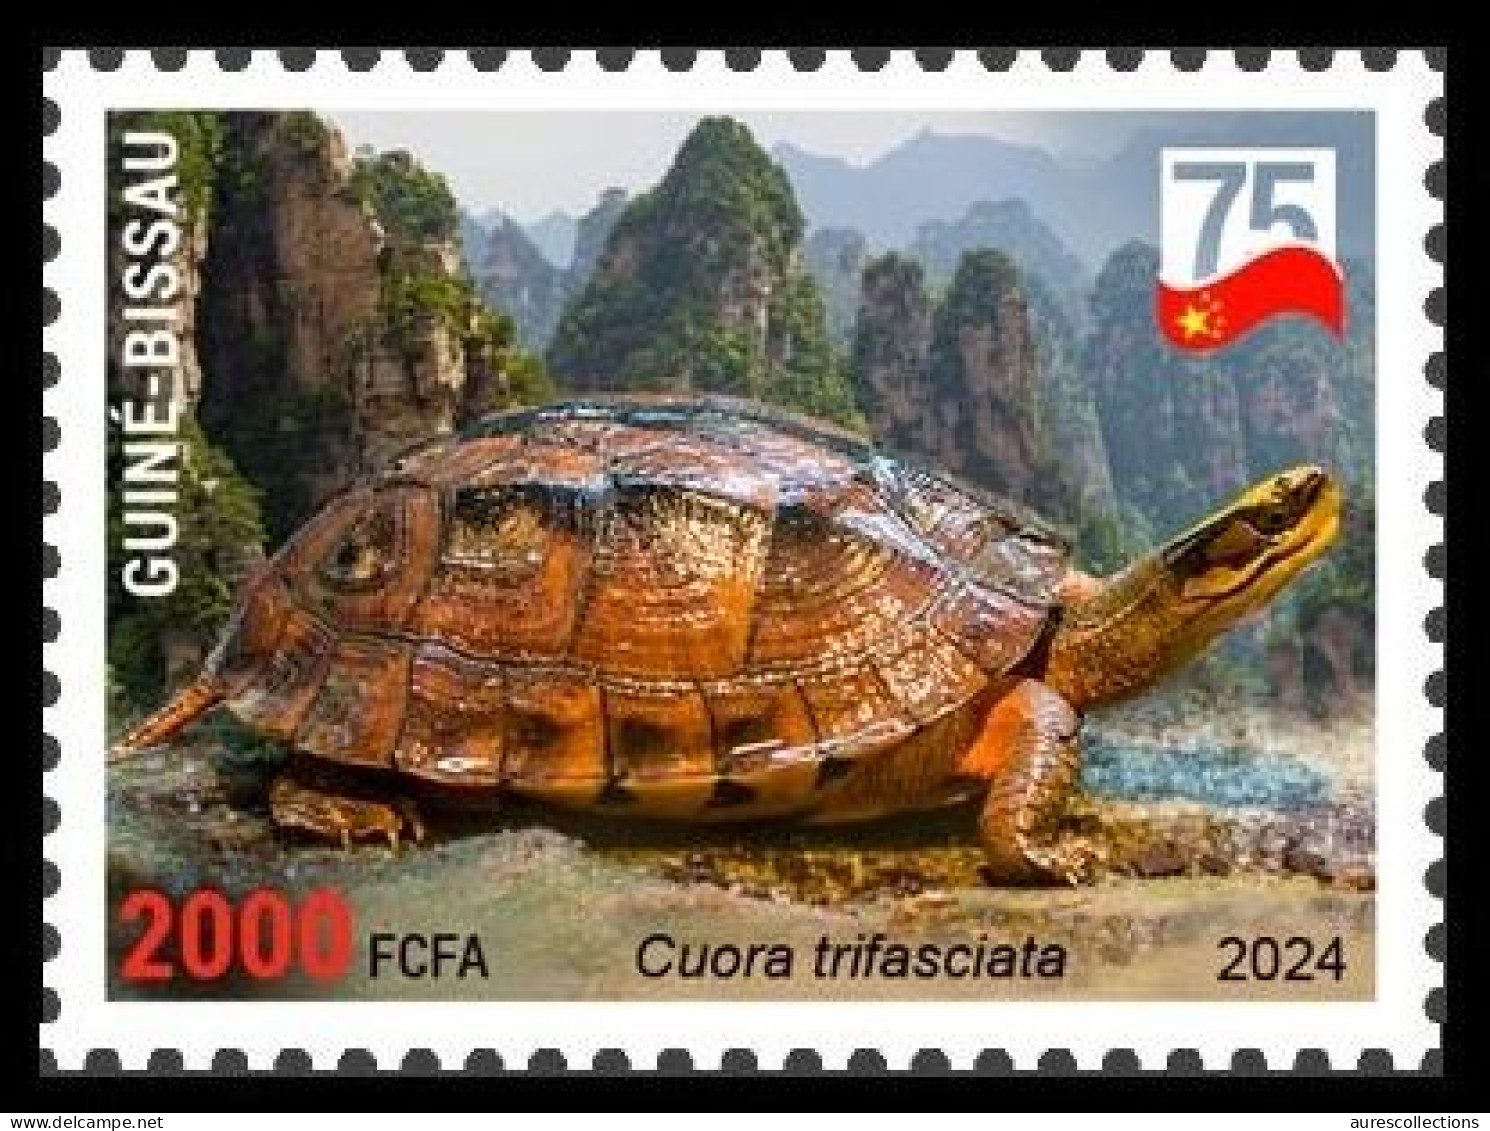 GUINEA BISSAU 2024 STAMP 1V - CHINA AMPHIBIANS & REPTILES - GOLDEN COIN TURTLE TURTLES TORTUES - CHINA 75 ANNIV. - MNH - Turtles